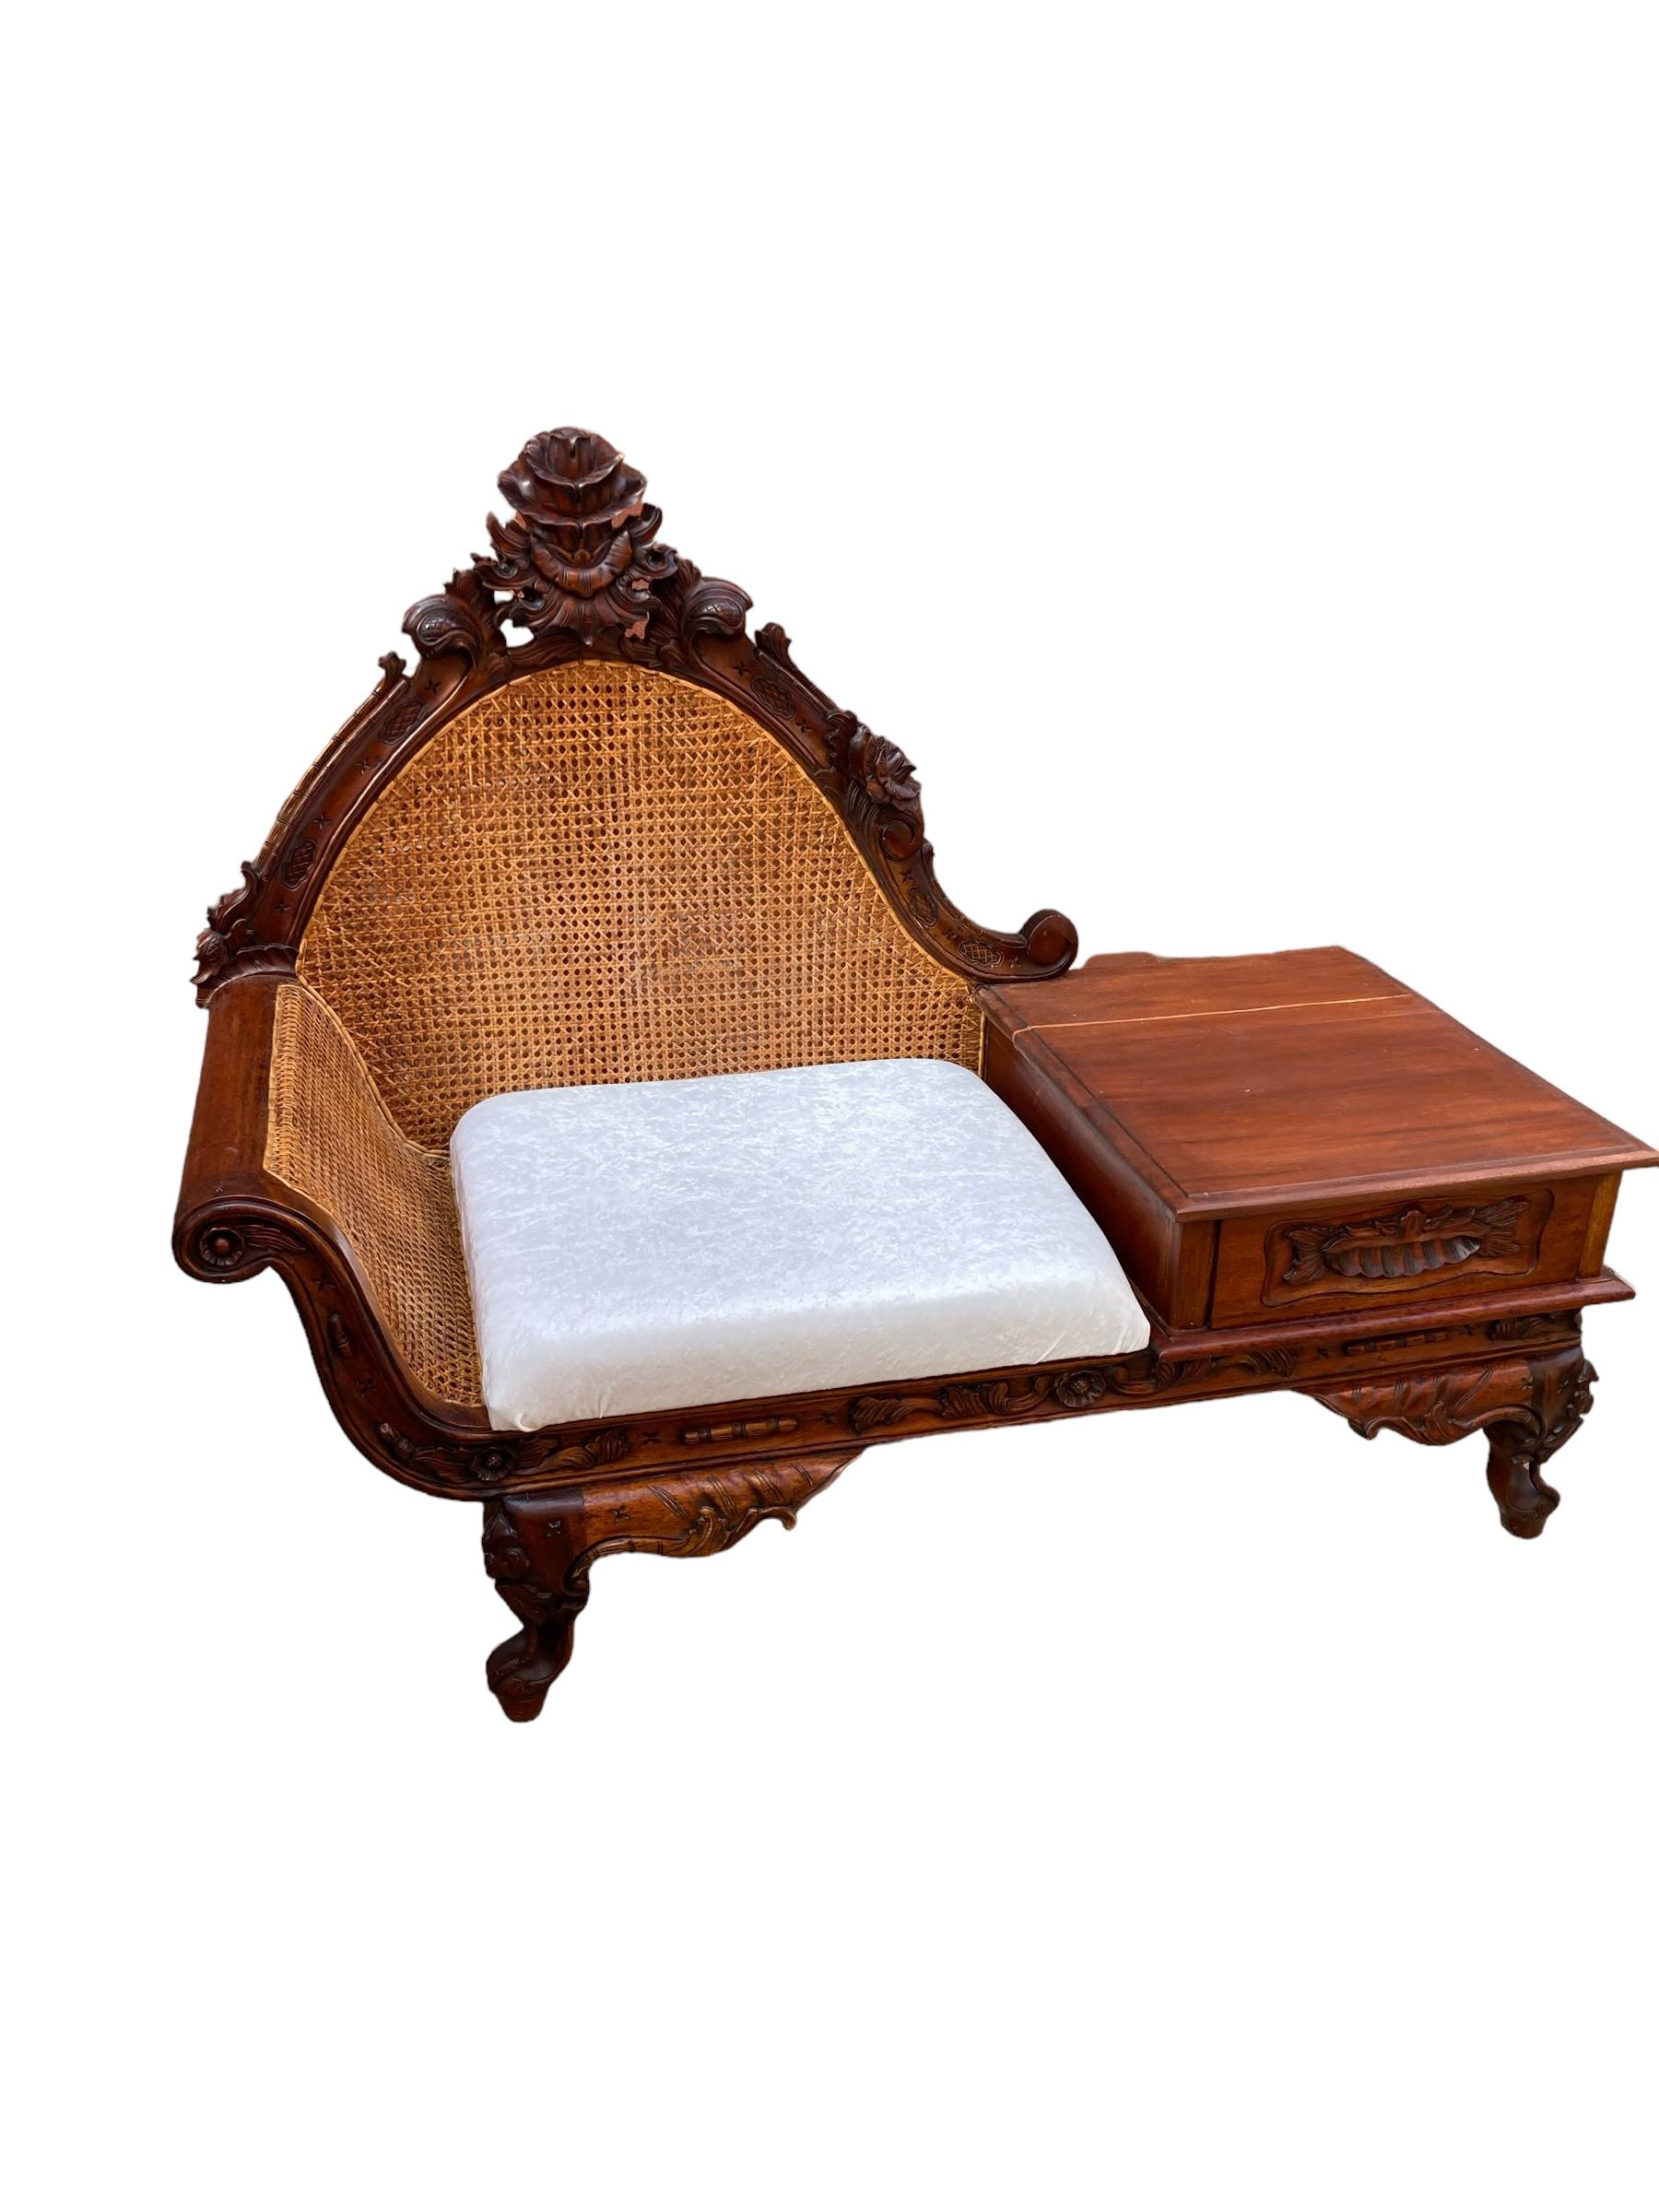 British Original Hand Carved Mahogany Victorian Telephone or Gossip Bench, Bergere  For Sale